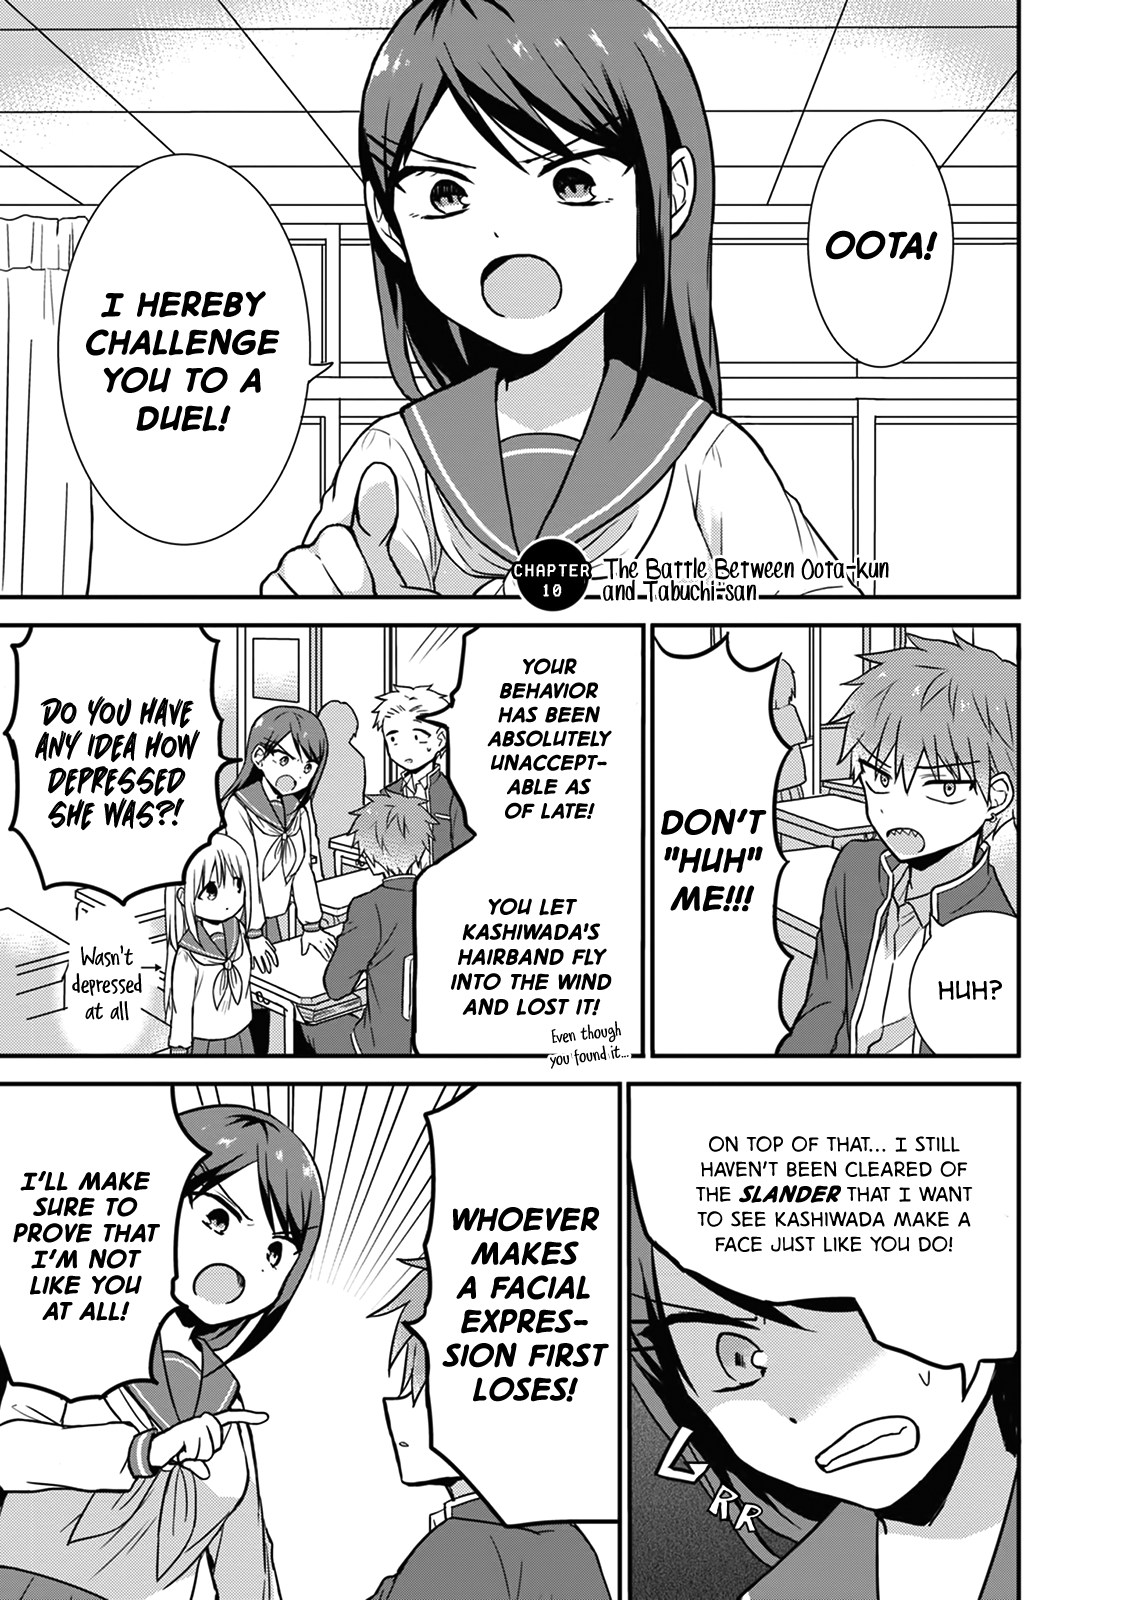 Expressionless Kashiwada-San And Emotional Oota-Kun Vol.1 Chapter 10: The Battle Between Oota-Kun And Tabuchi-San - Picture 2